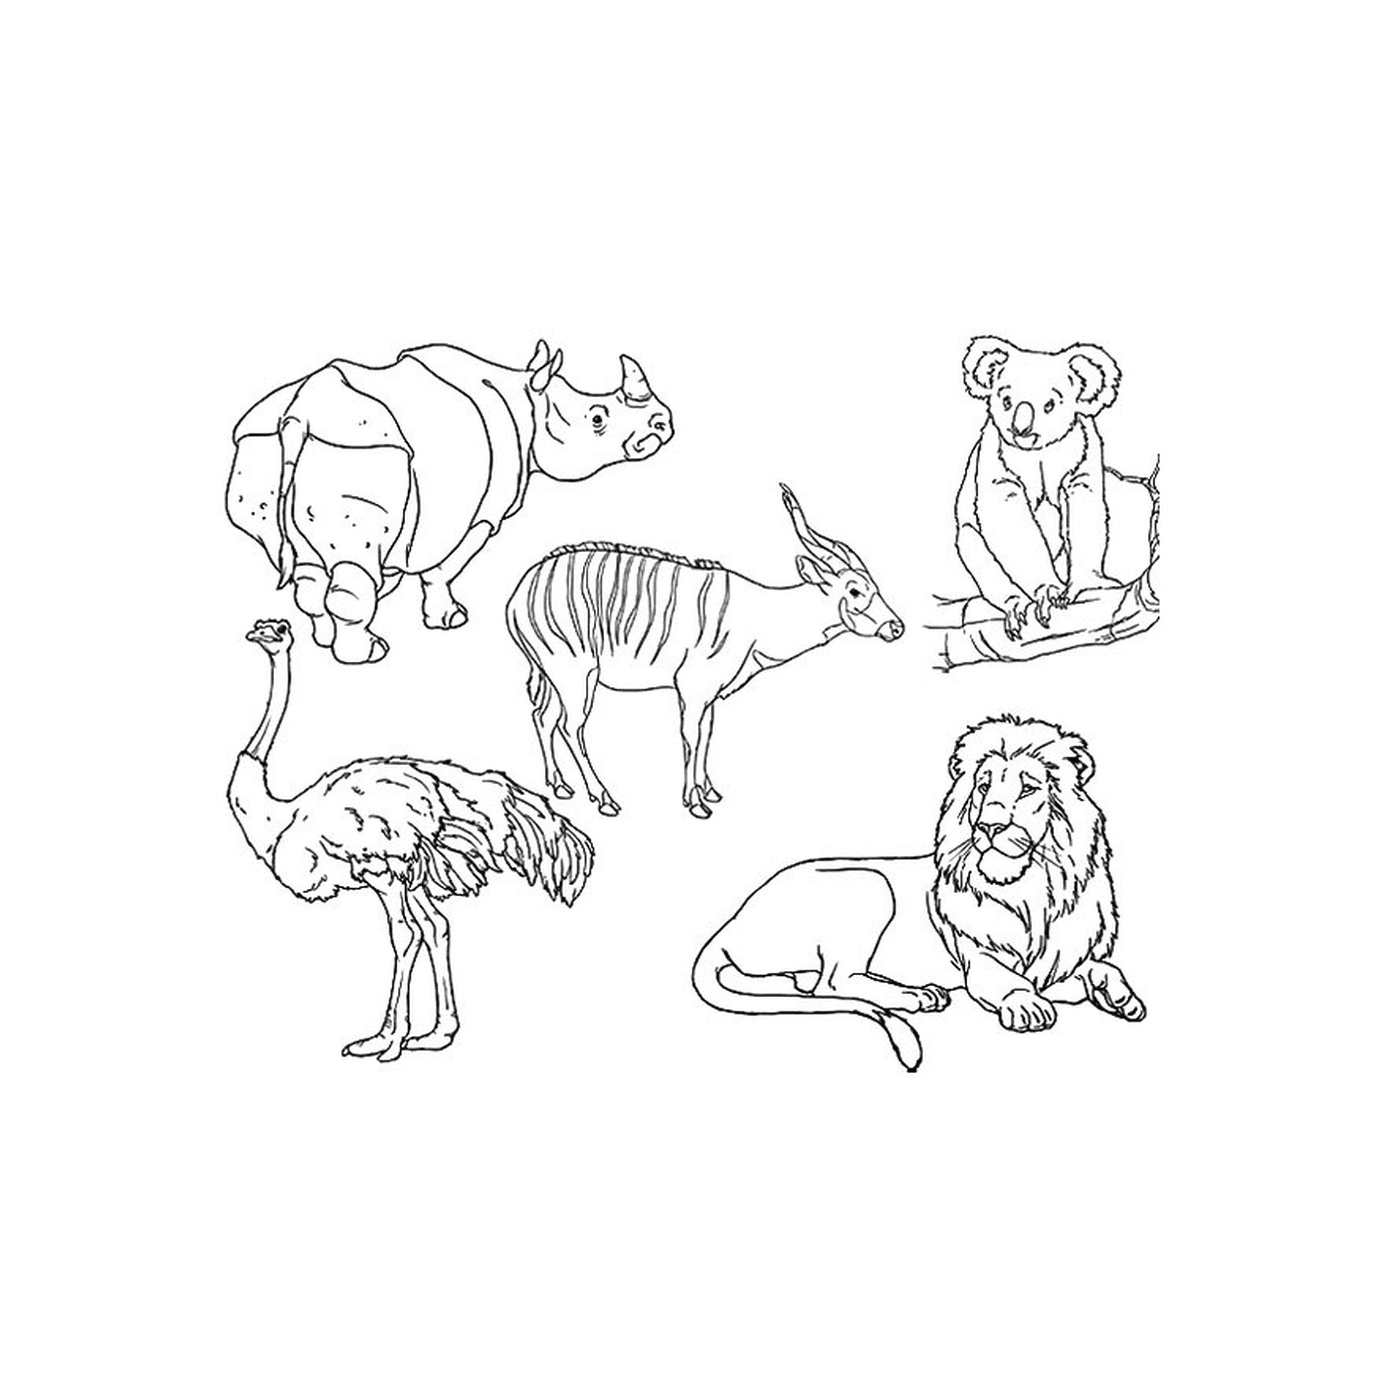  A group of animals drawn 